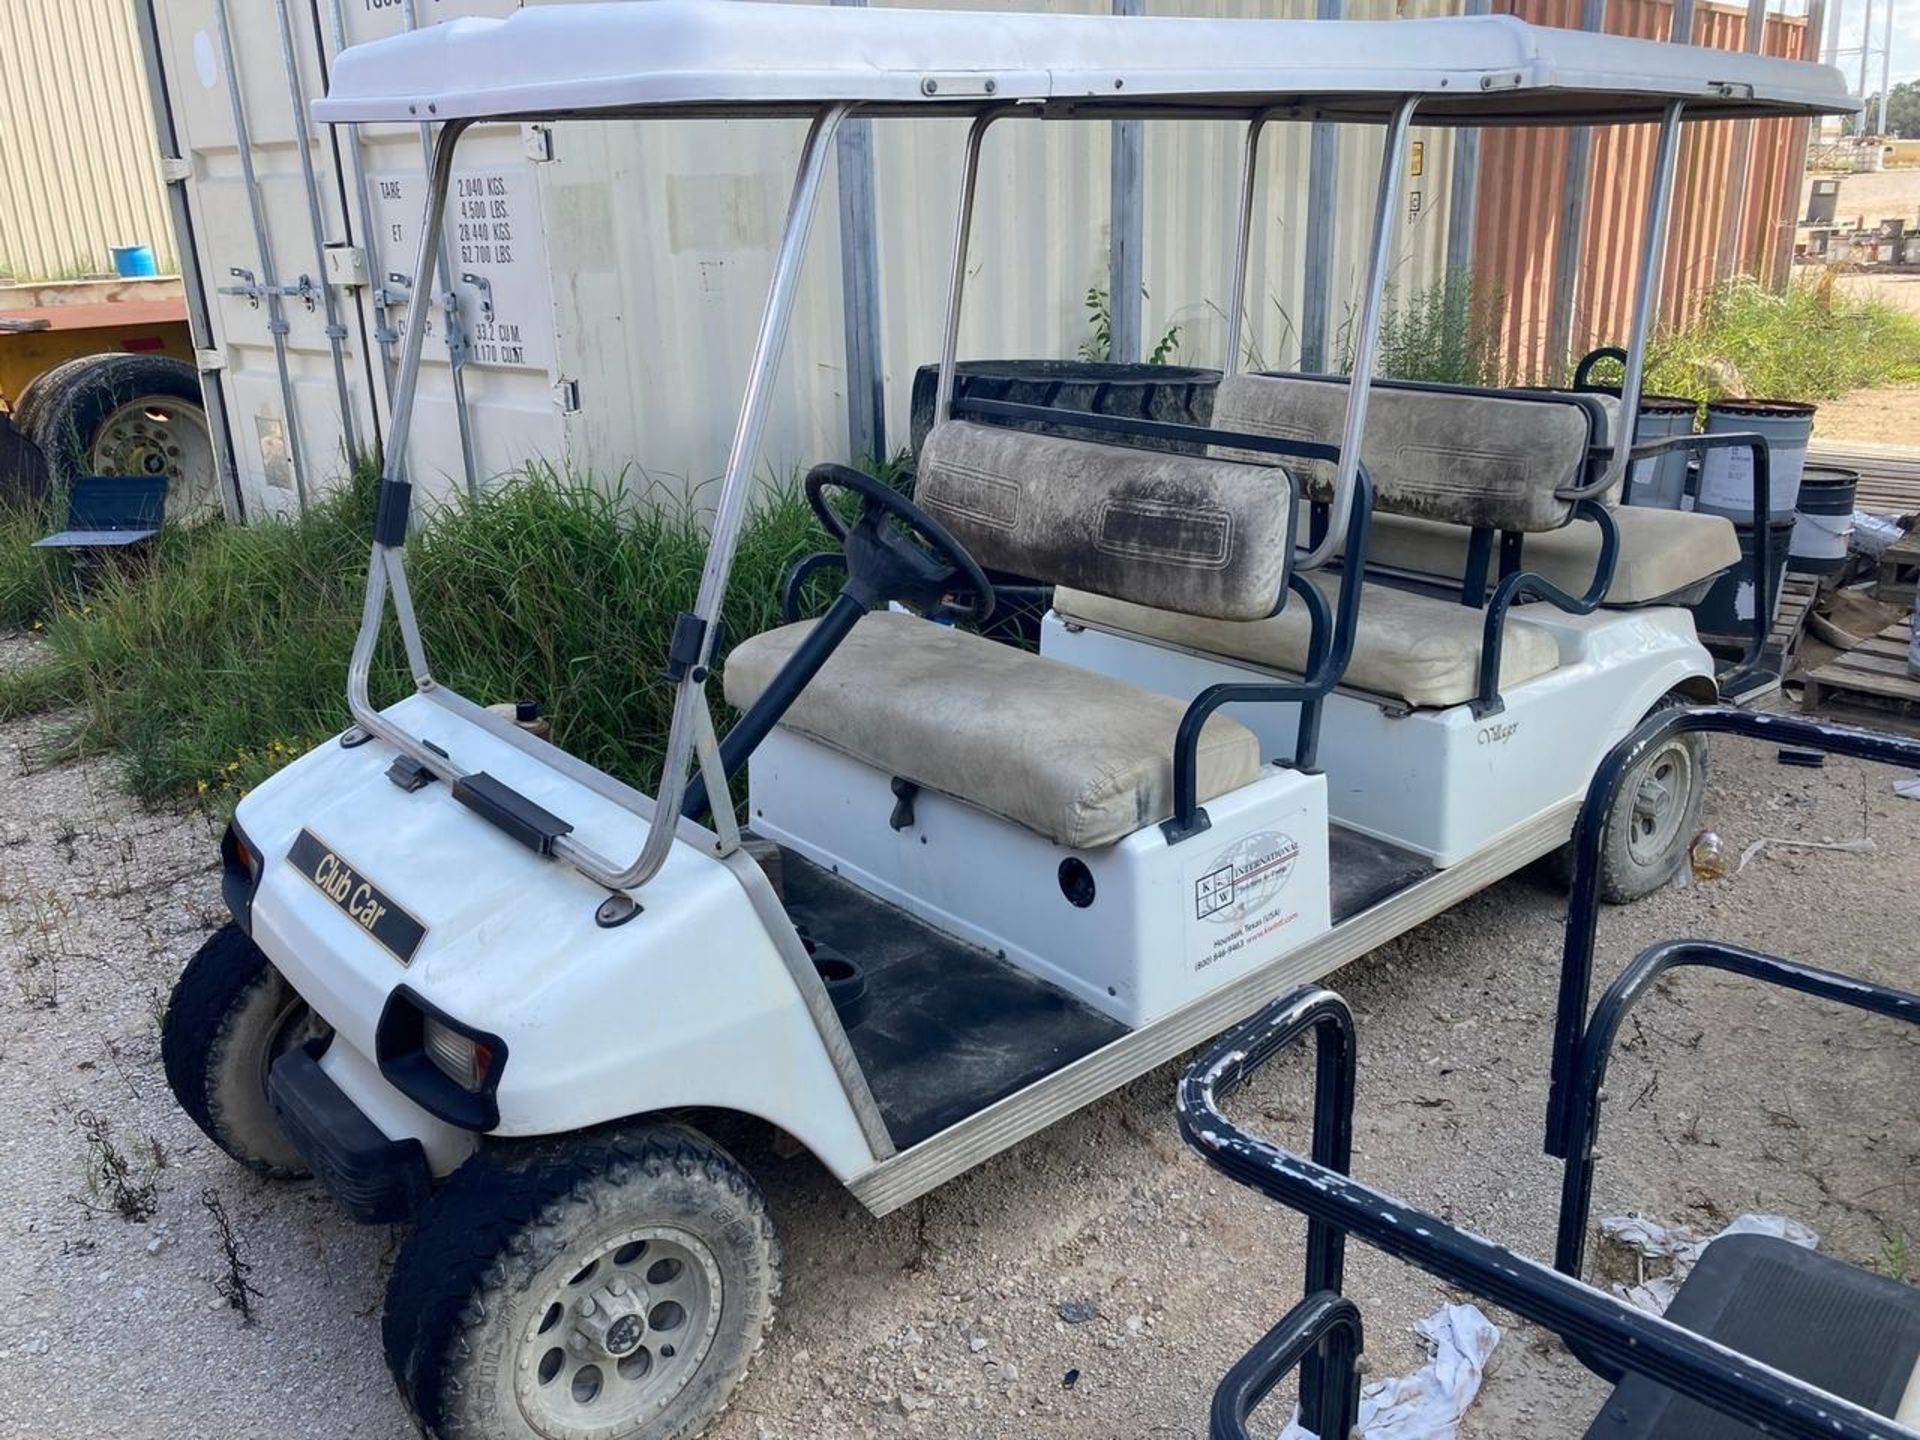 Club Car Villager 6-Seat Electric Golf Cart - Image 2 of 2